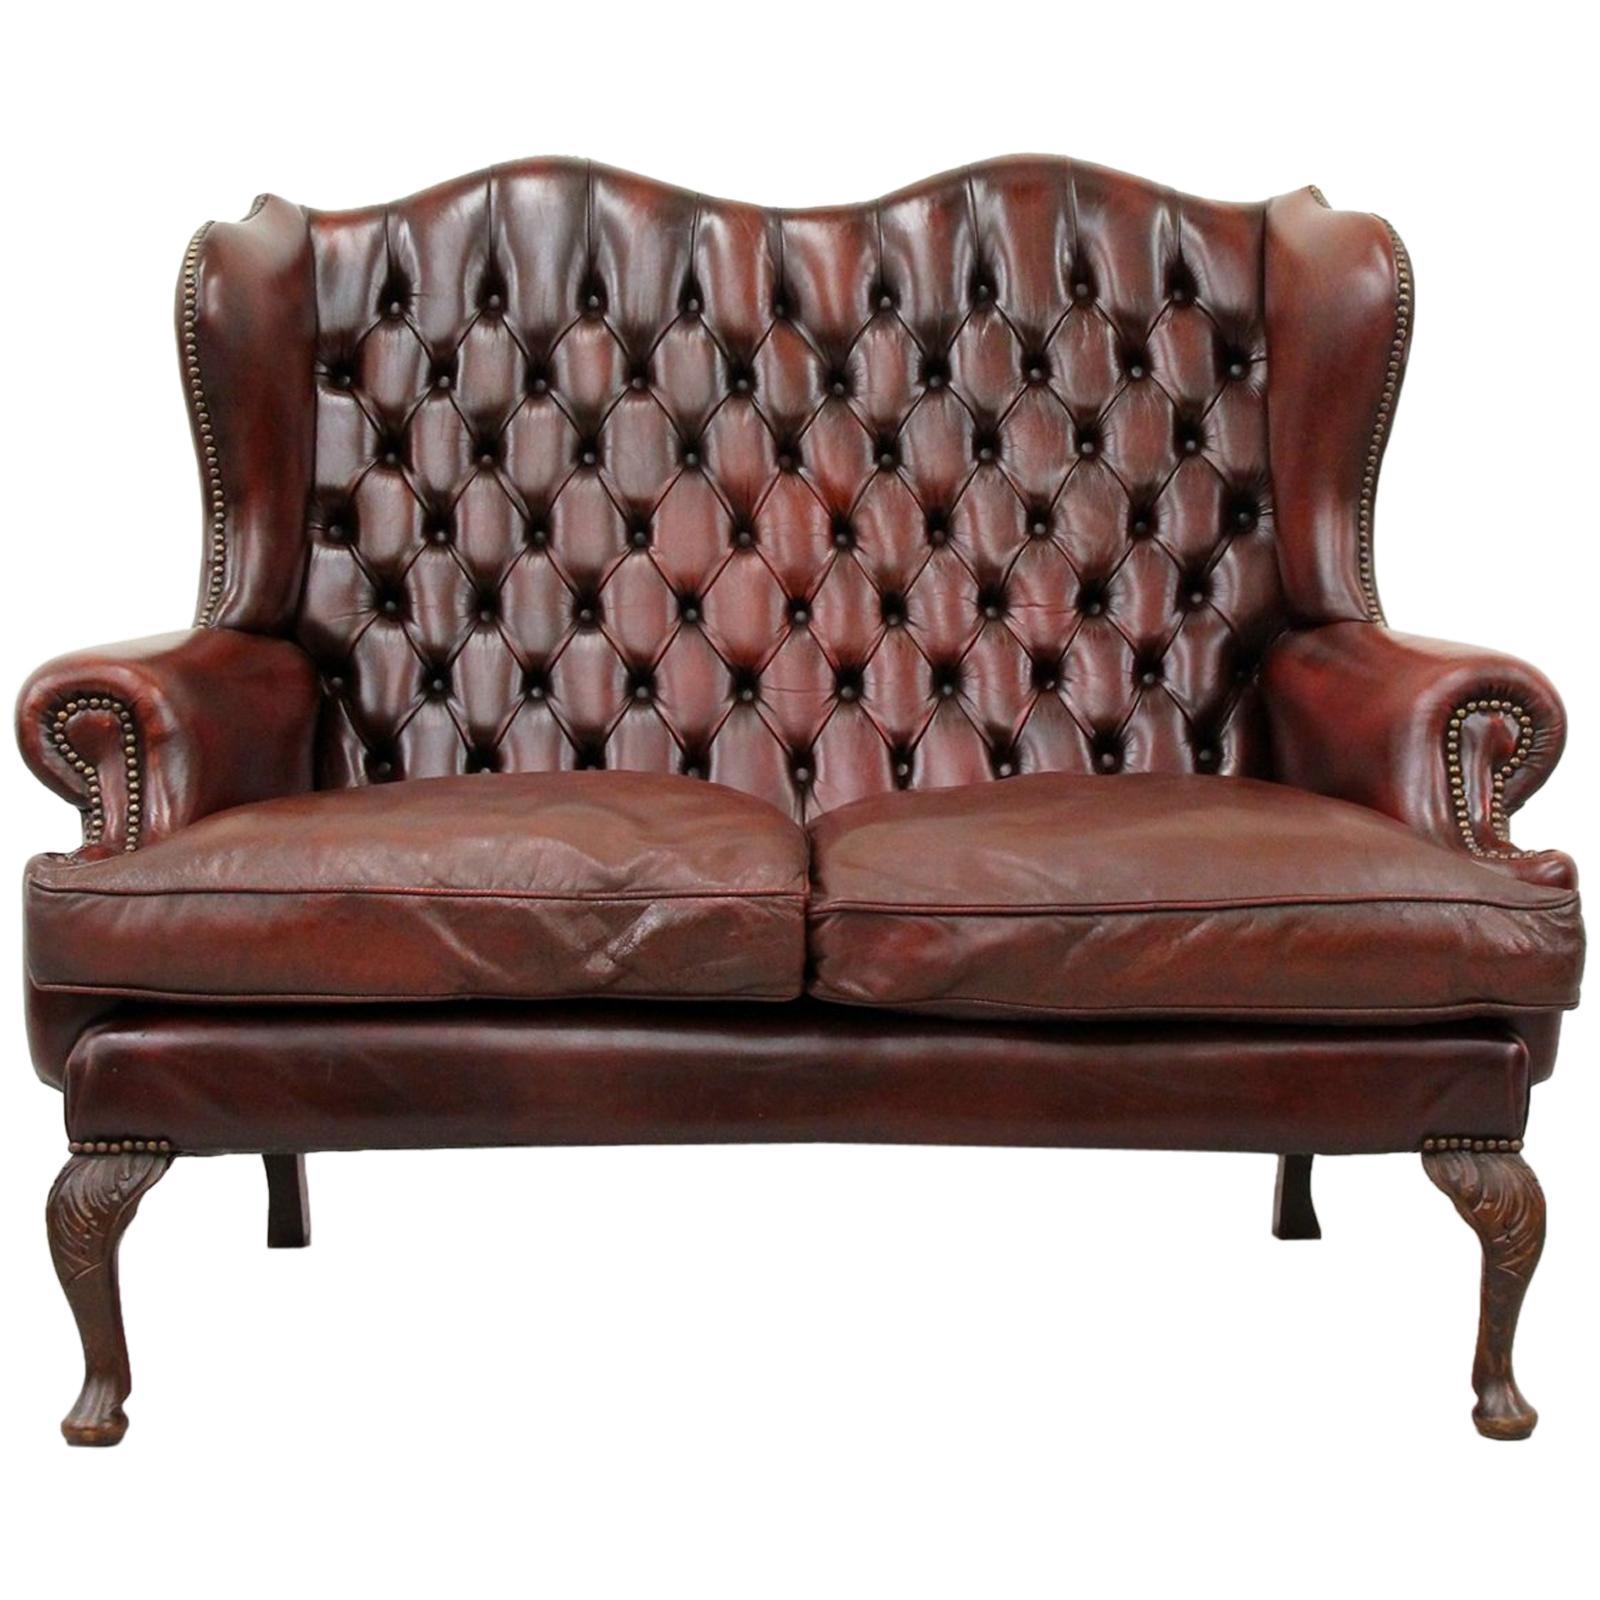 Chesterfield Chippendale Sofa Leather Antique Vintage Couch English For Sale